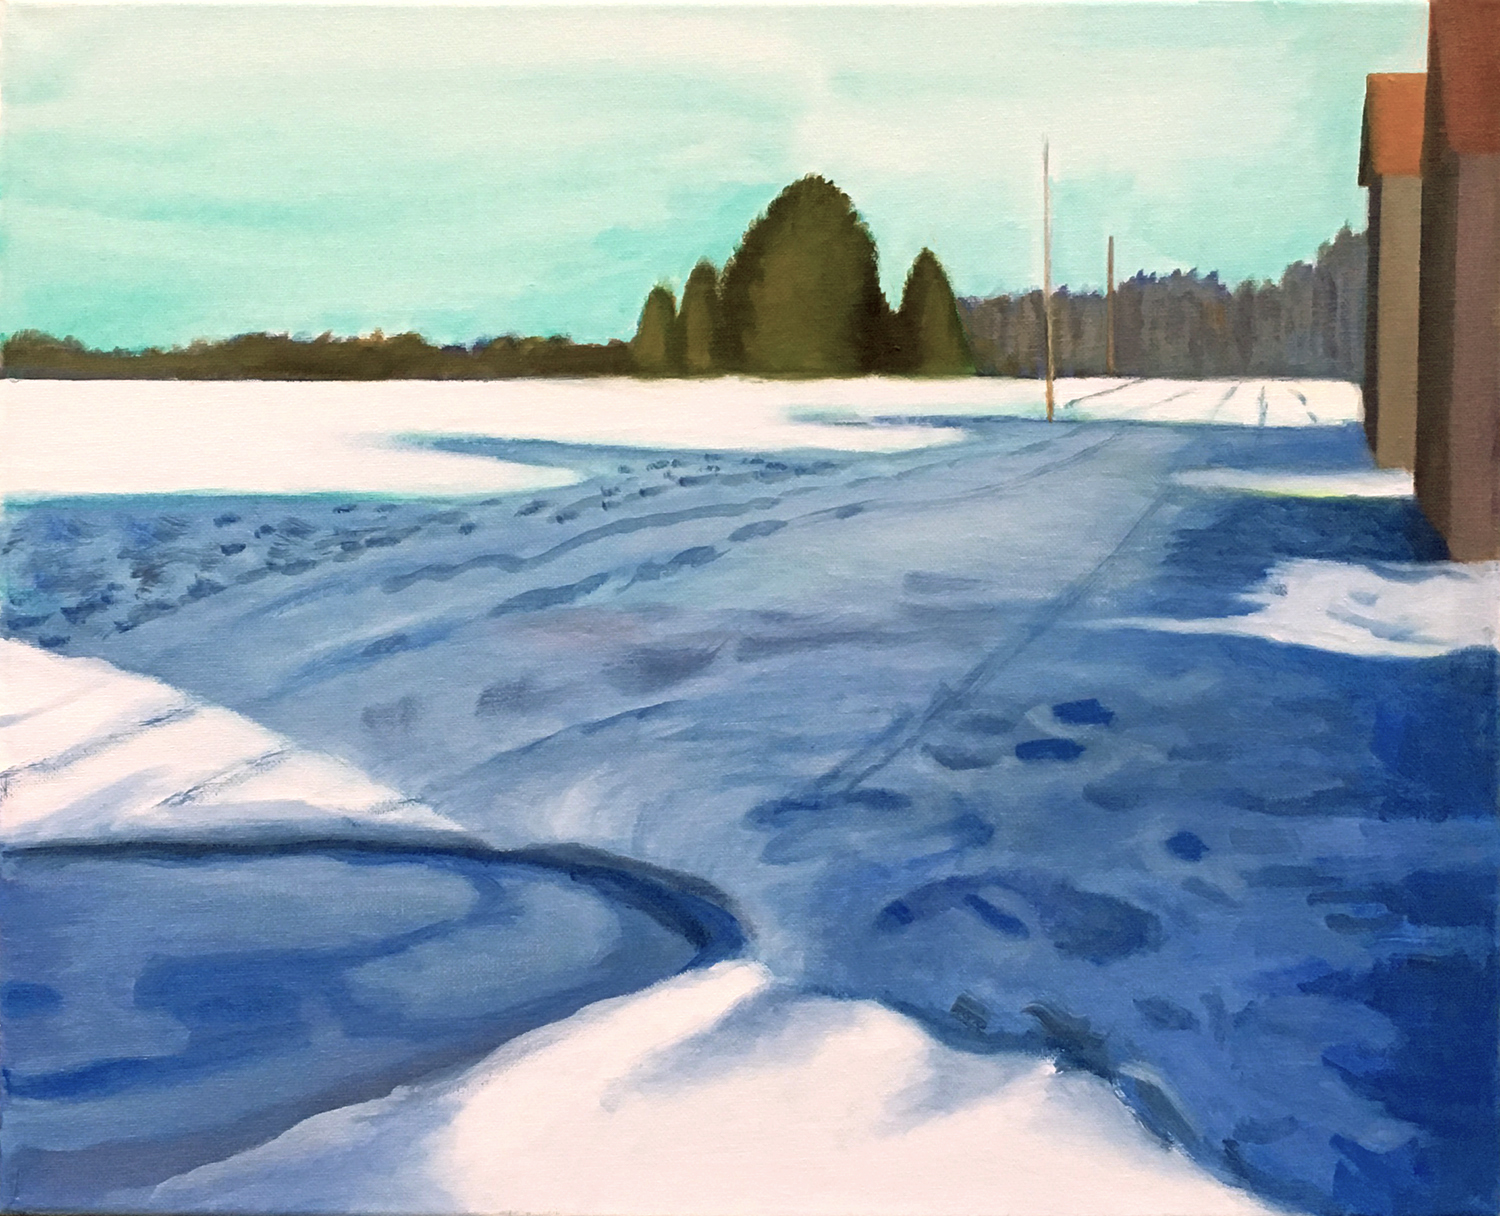 Winter by David Davenport 16X20 oil on canvas at Craven Allen Gallery  1400